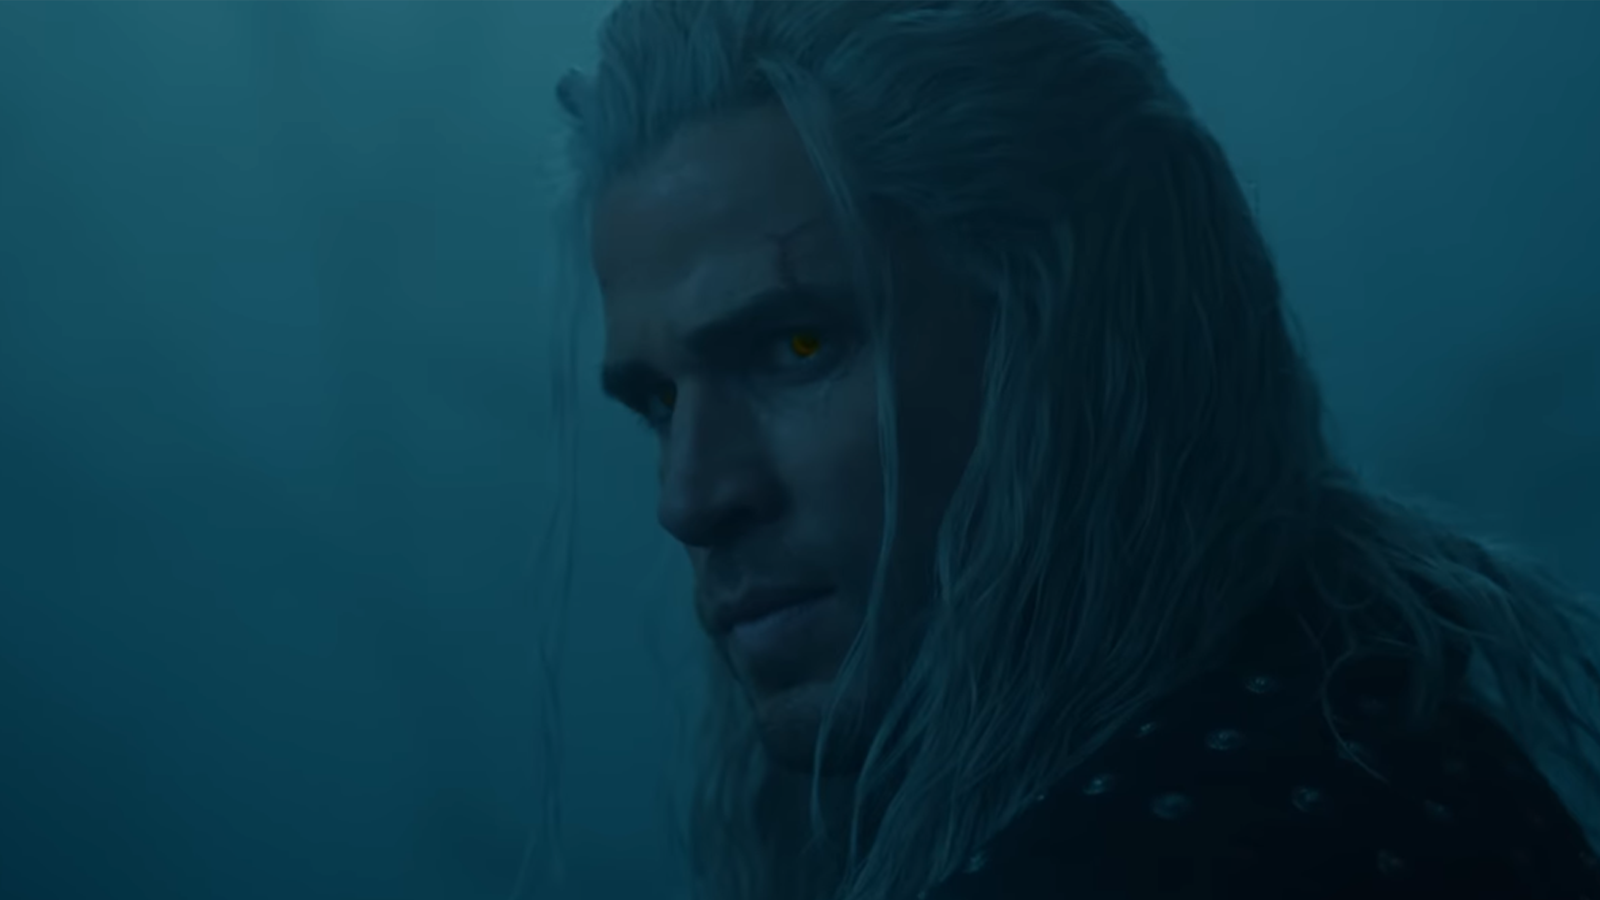 Here’s a look at Liam Hemsworth’s Geralt in The Witcher Season 4